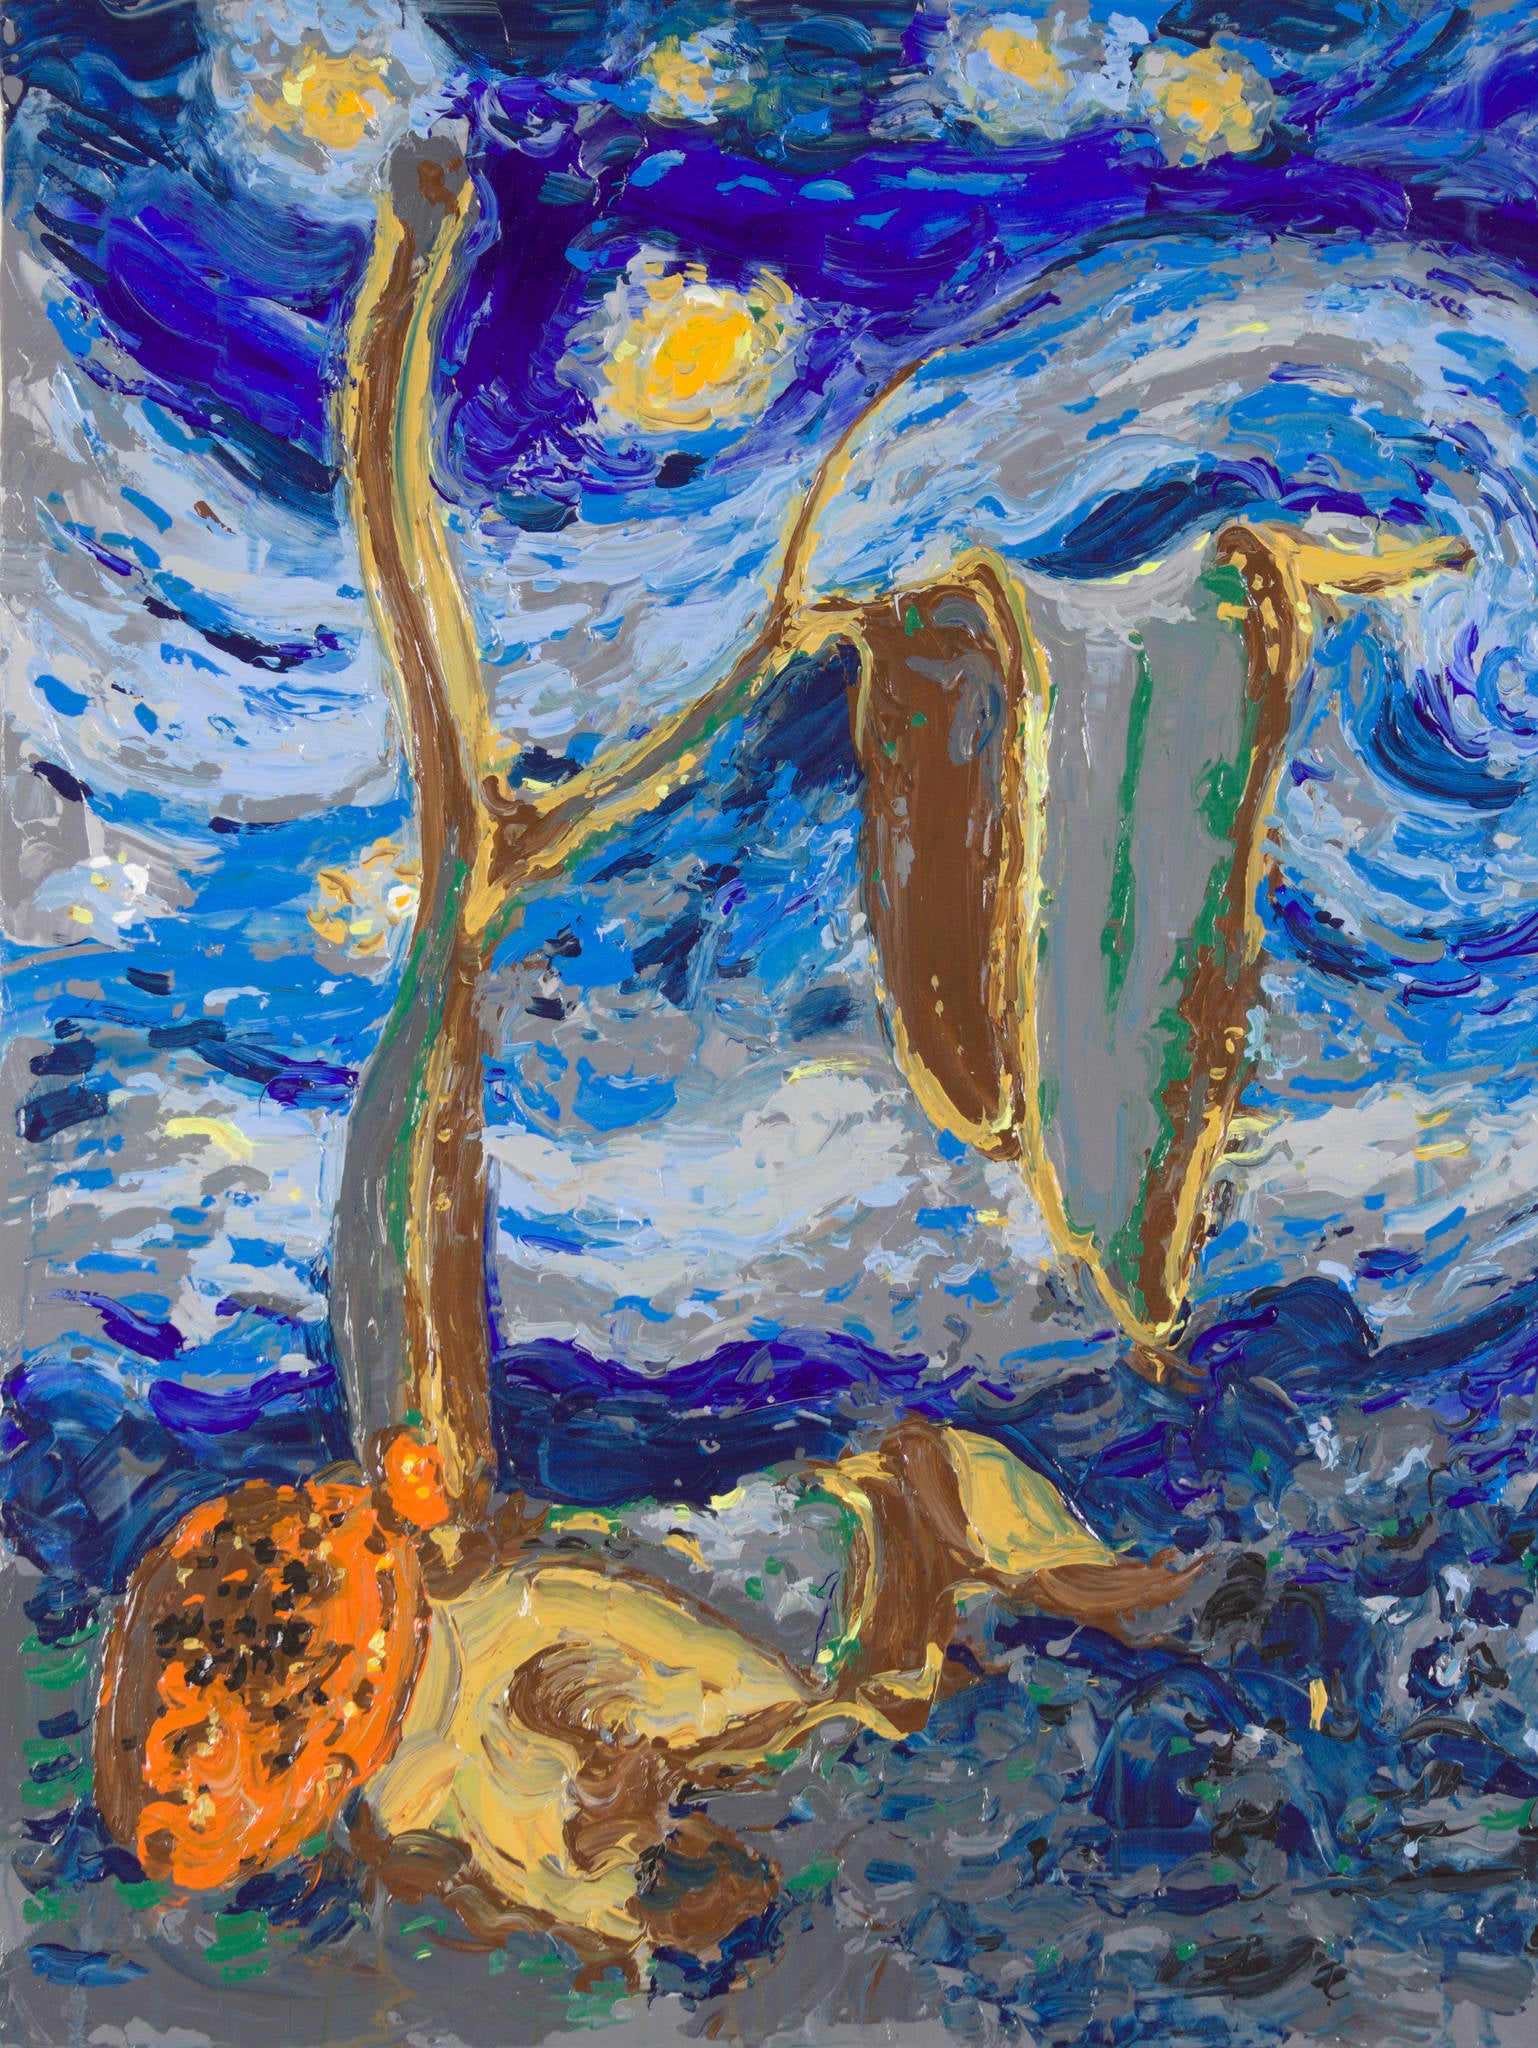 Philippe Le Miere 'Study for After Vincent Dali van Salvador Gogh - The Persistence of the Starry Night Memory'